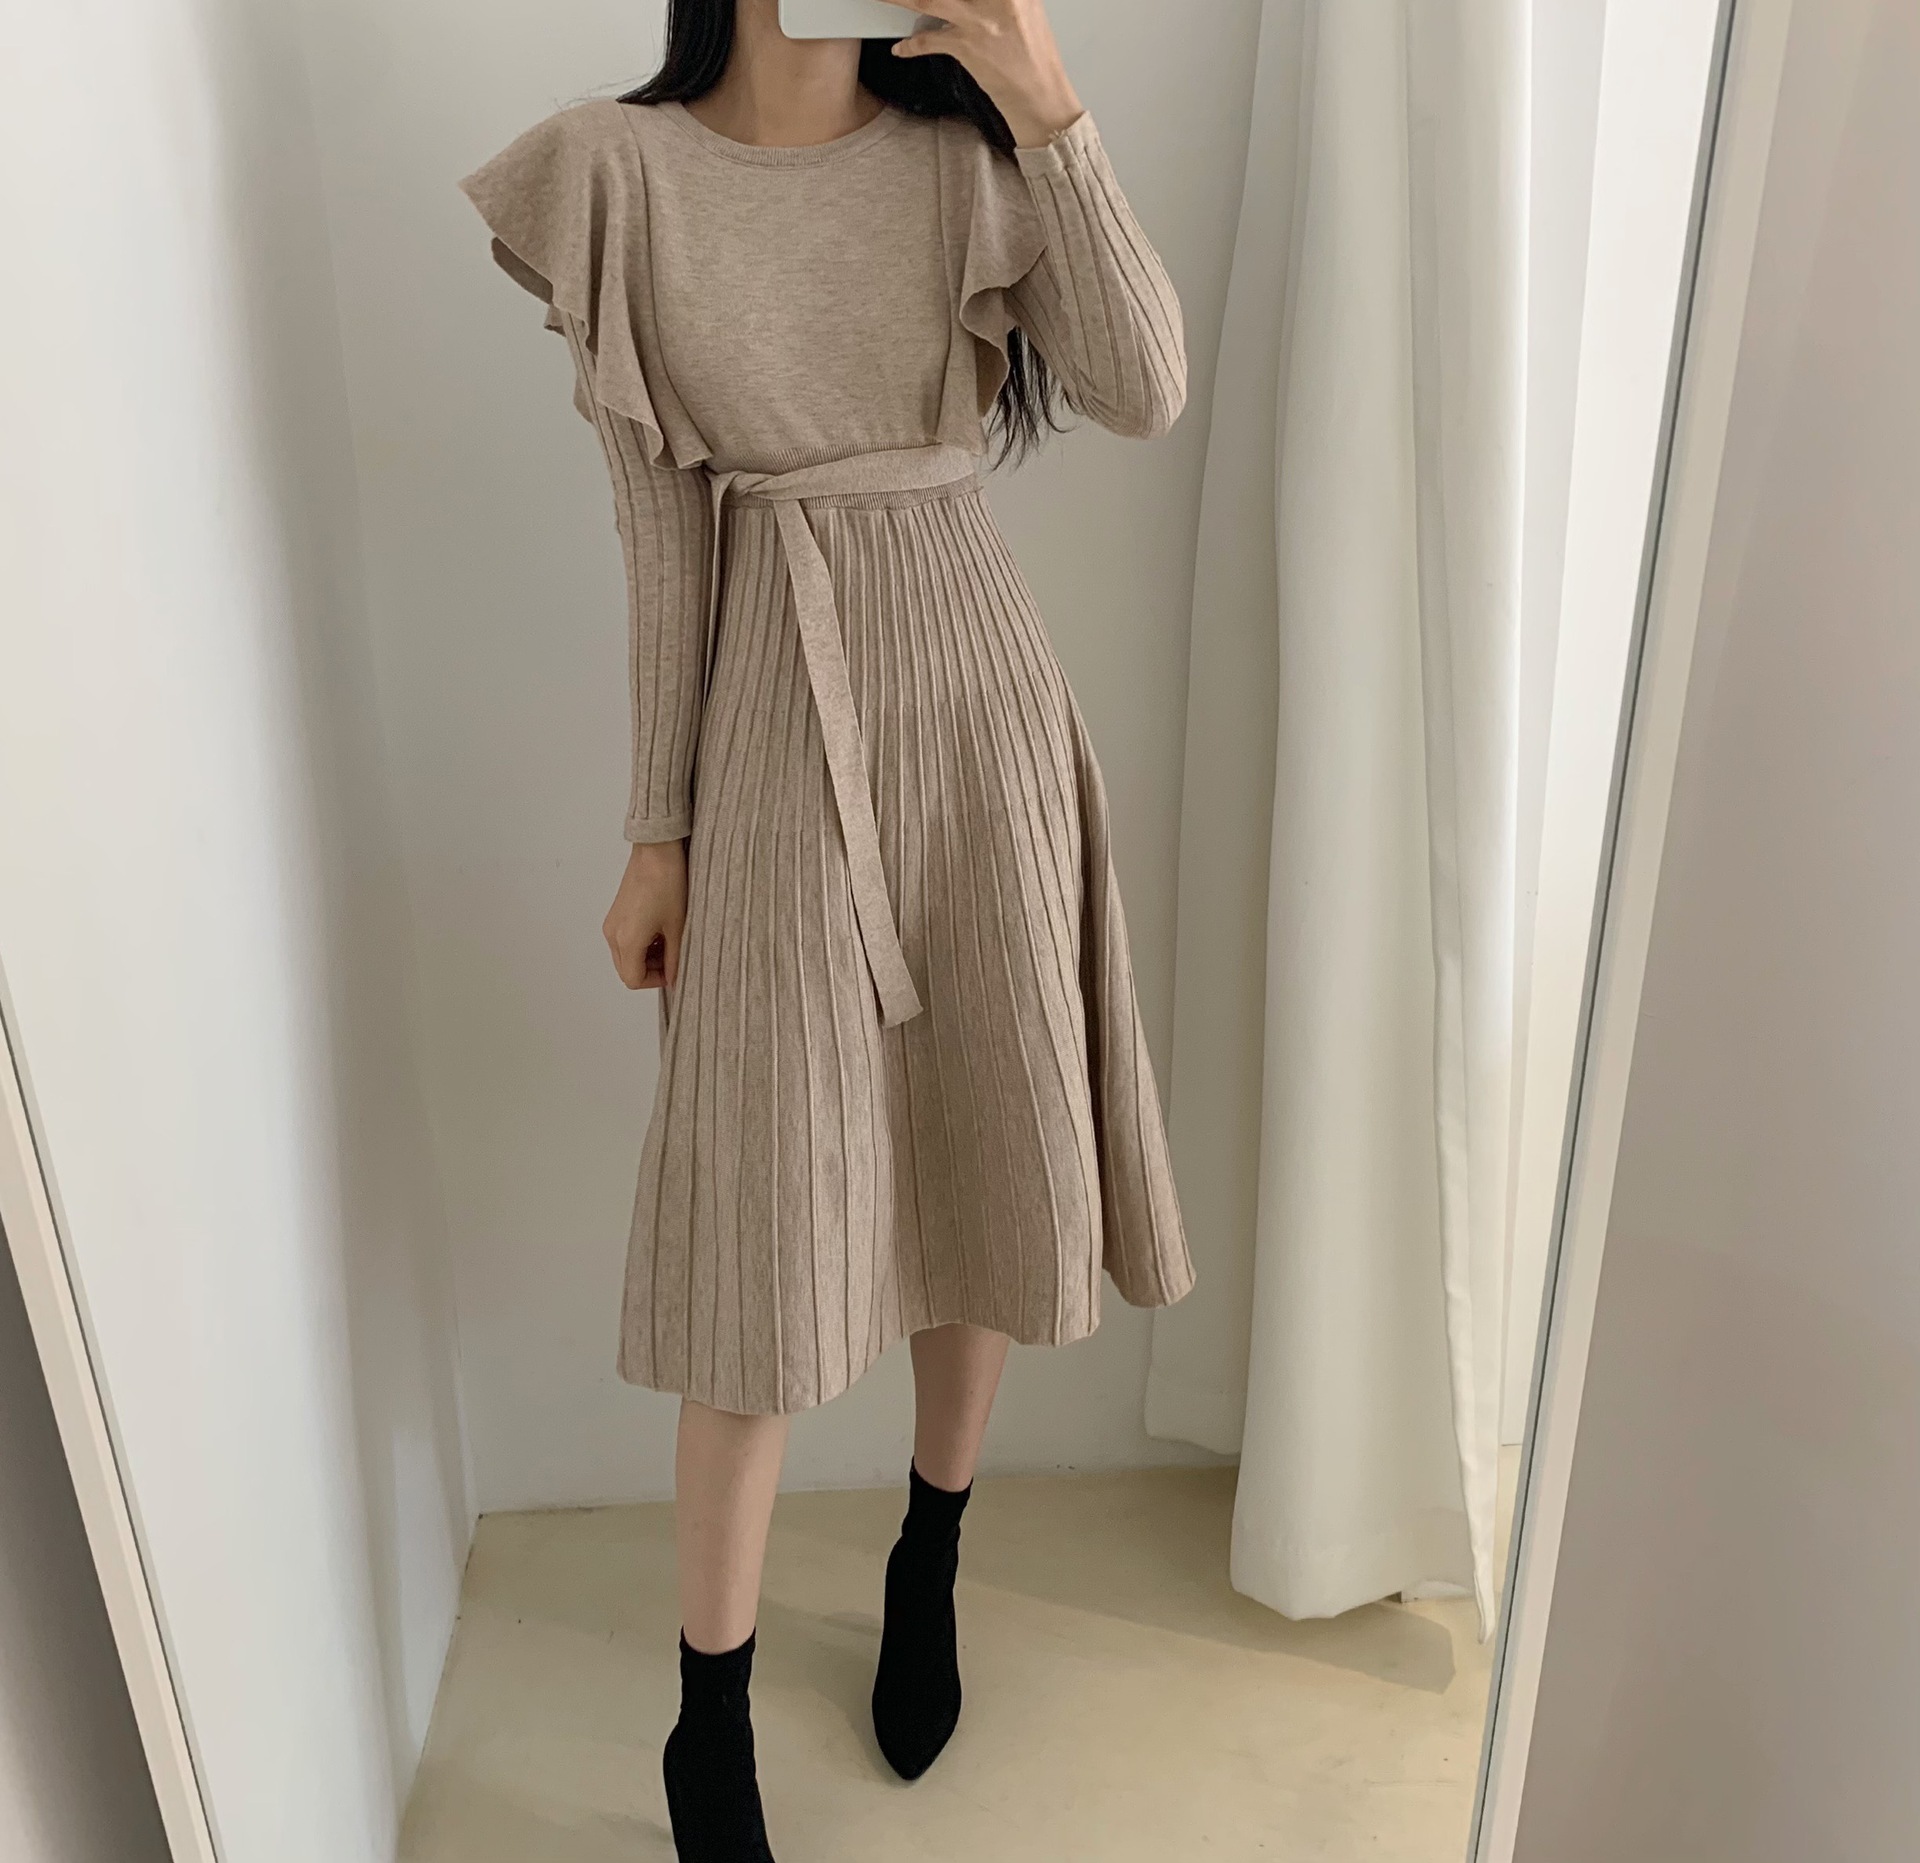 Rotimia Vintage Ruffled Lace-Up Knitted Dress